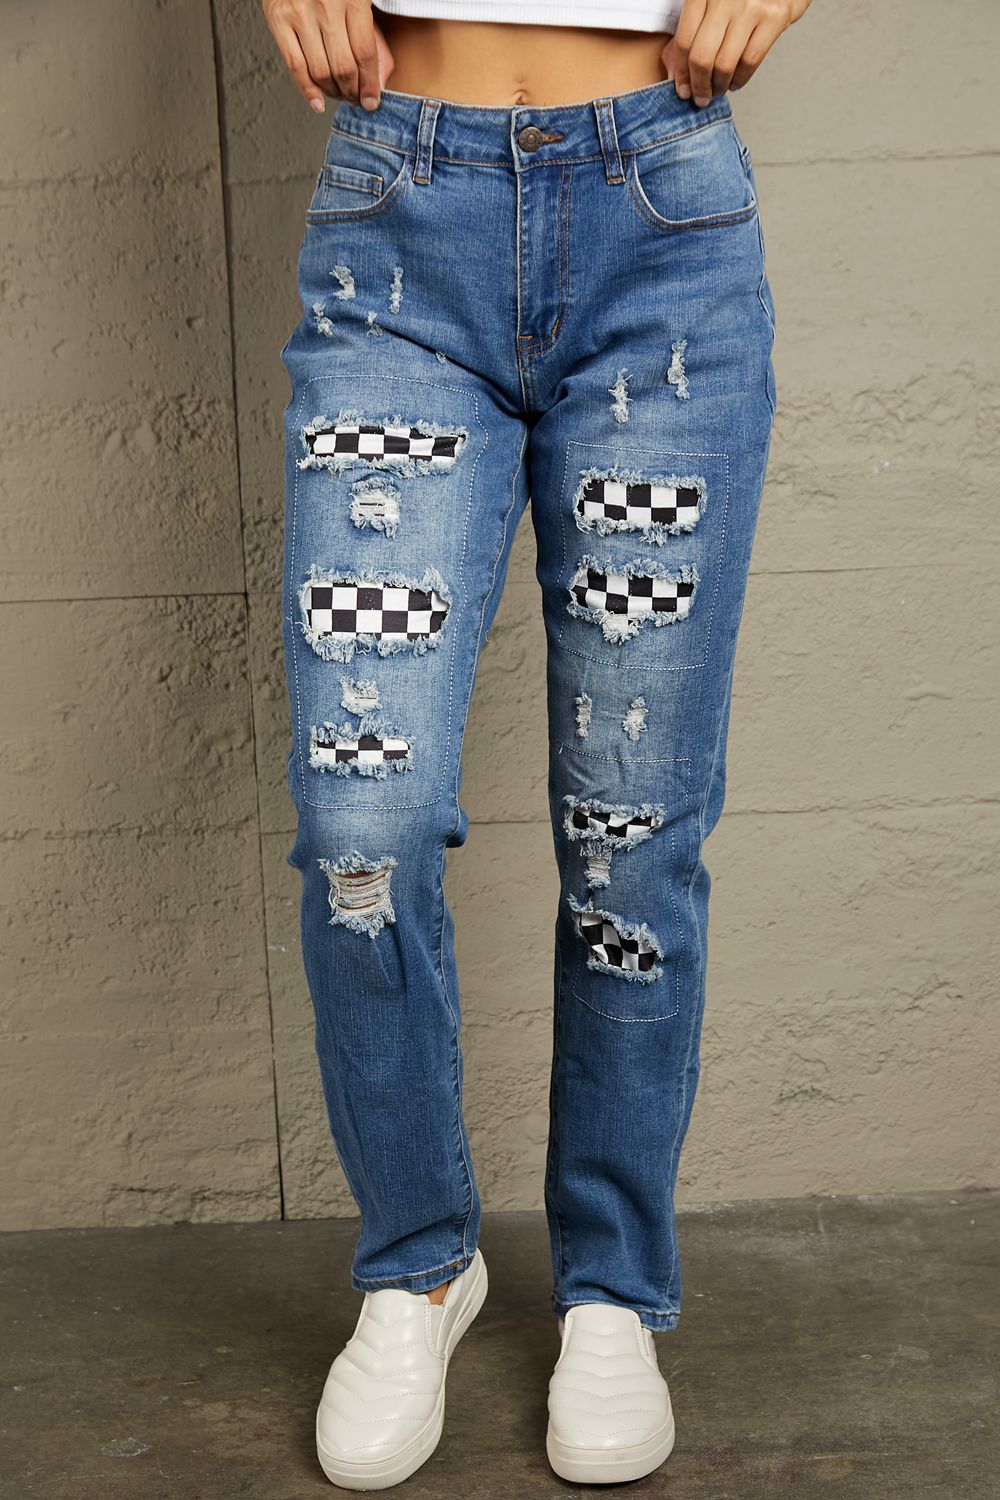 Baeful Checkered Patchwork Mid Waist Distressed Jeans - Jeans - FITGGINS